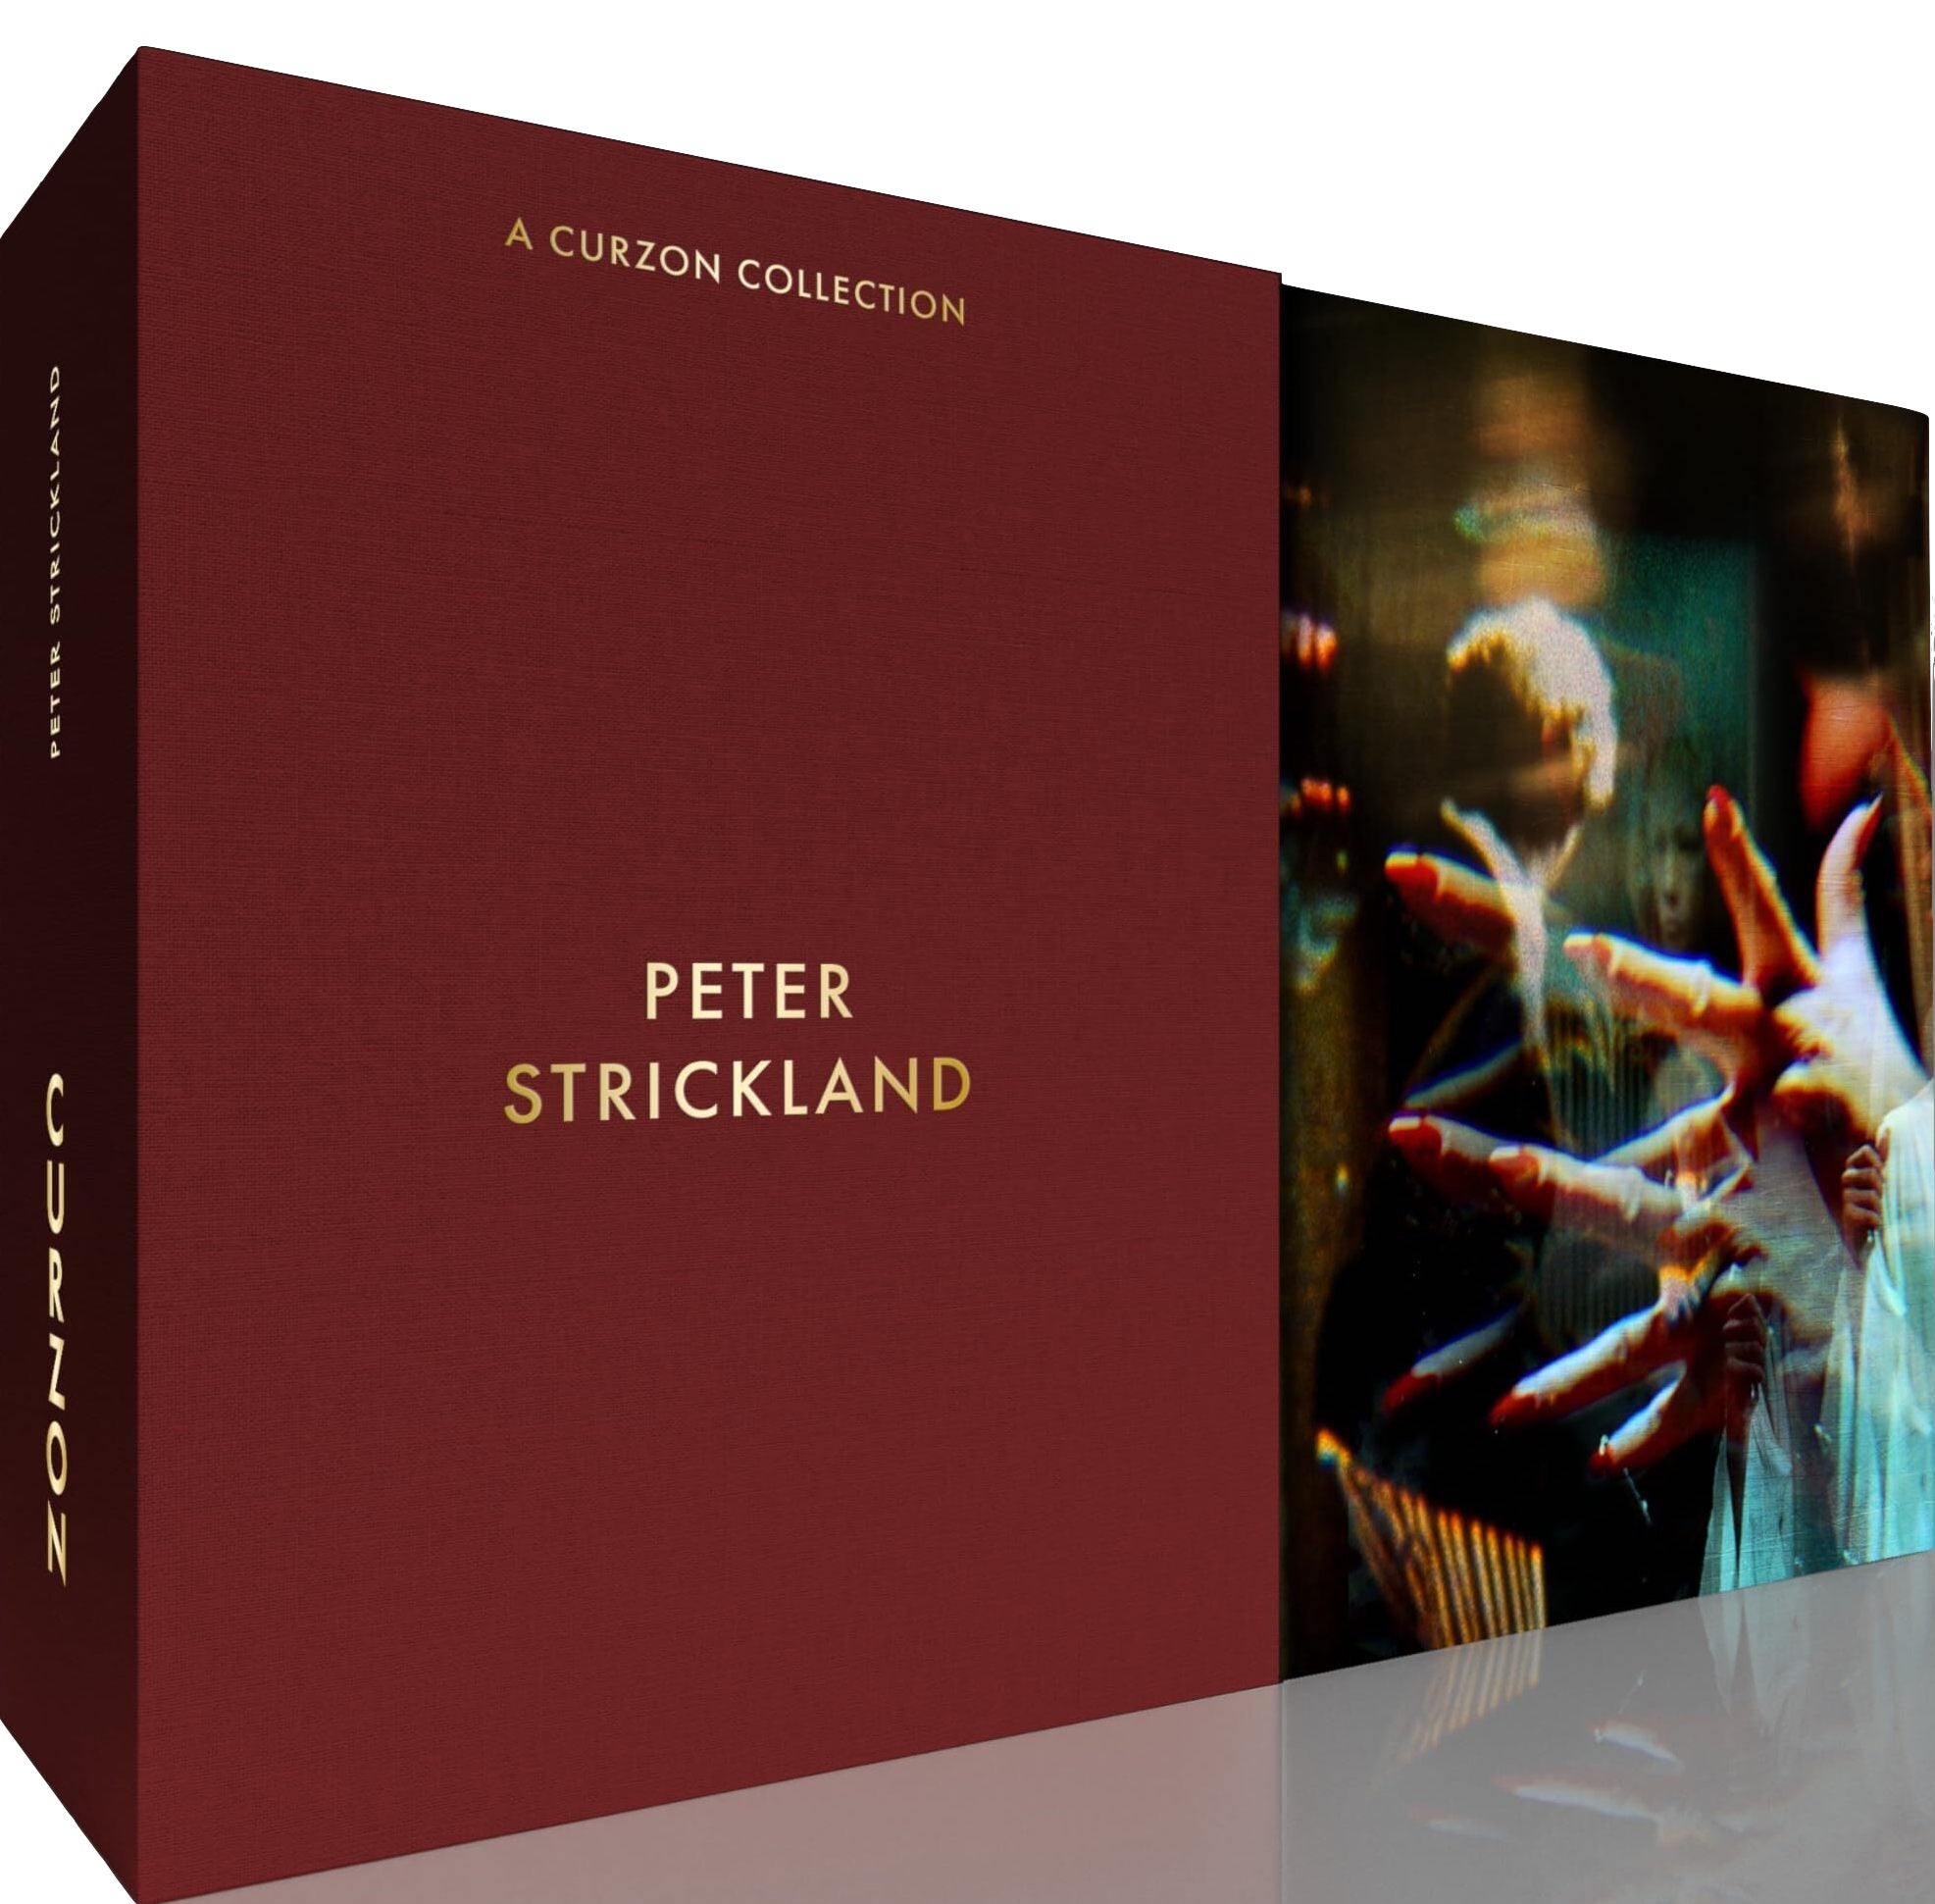 PETER STRICKLAND: A CURZON COLLECTION (REGION B IMPORT - LIMITED EDITION) BLU-RAY [PRE-ORDER]